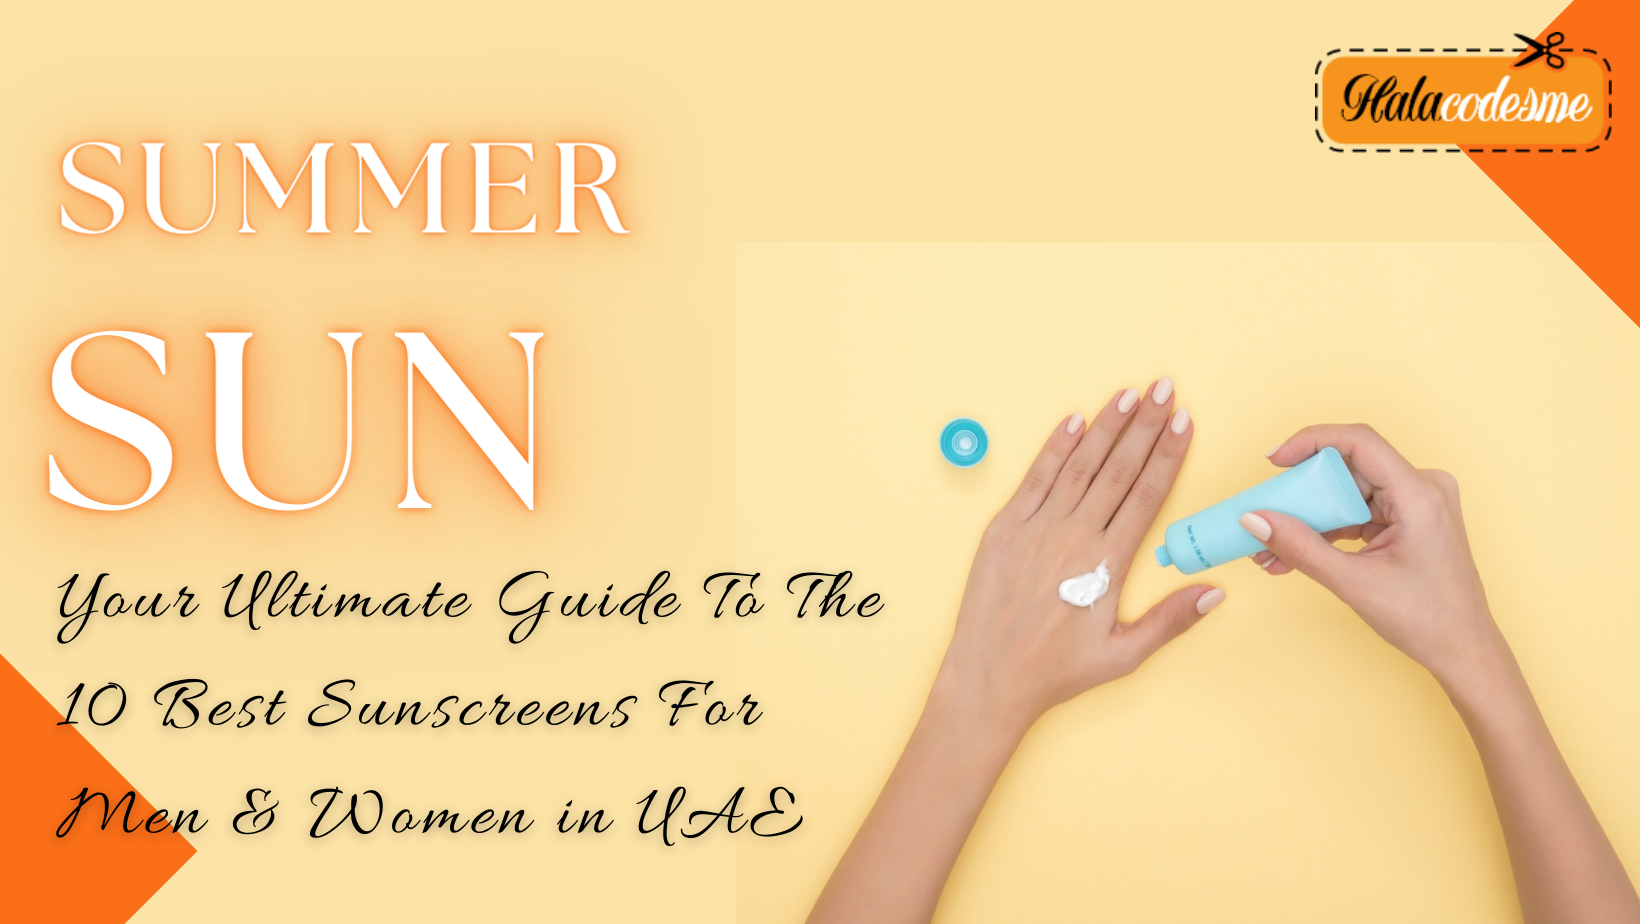 Your Ultimate Guide To The 10 Best Sunscreens For Men & Women in UAE.